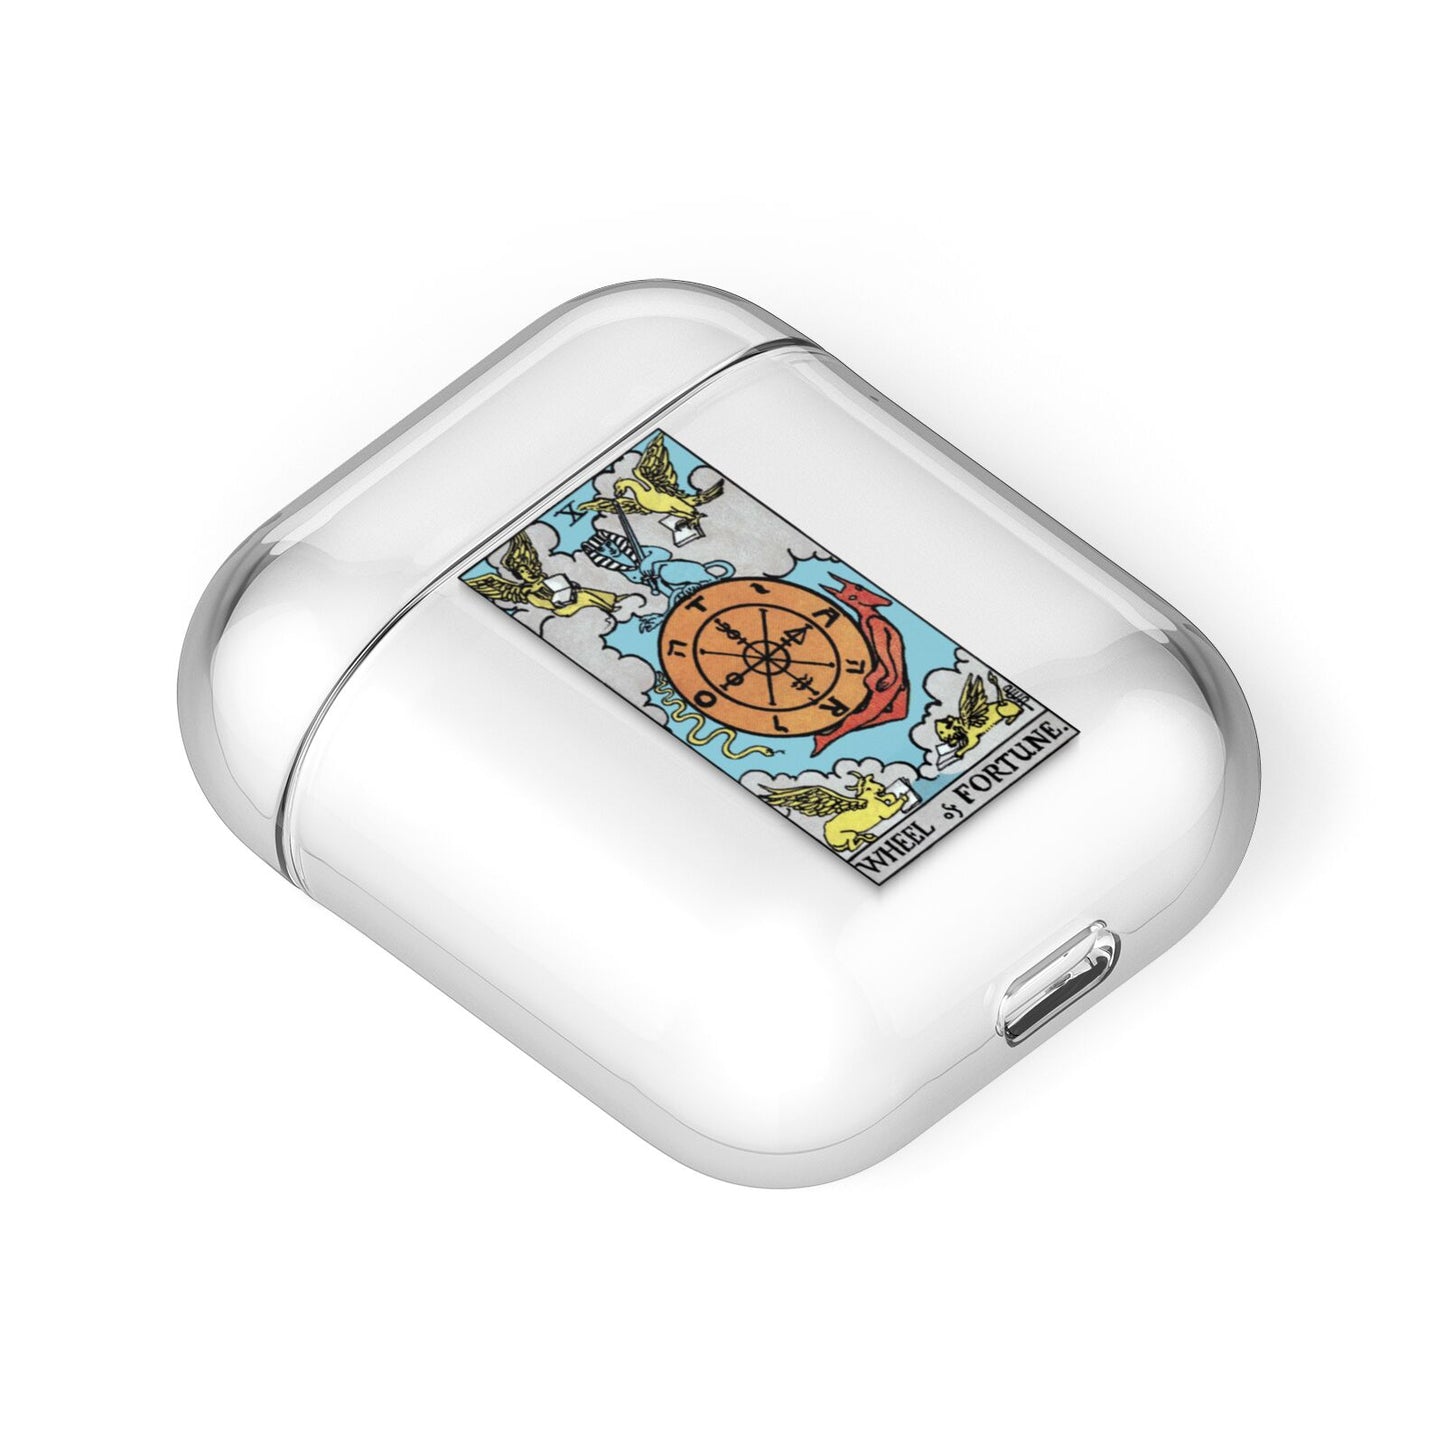 Wheel of Fortune Tarot Card AirPods Case Laid Flat